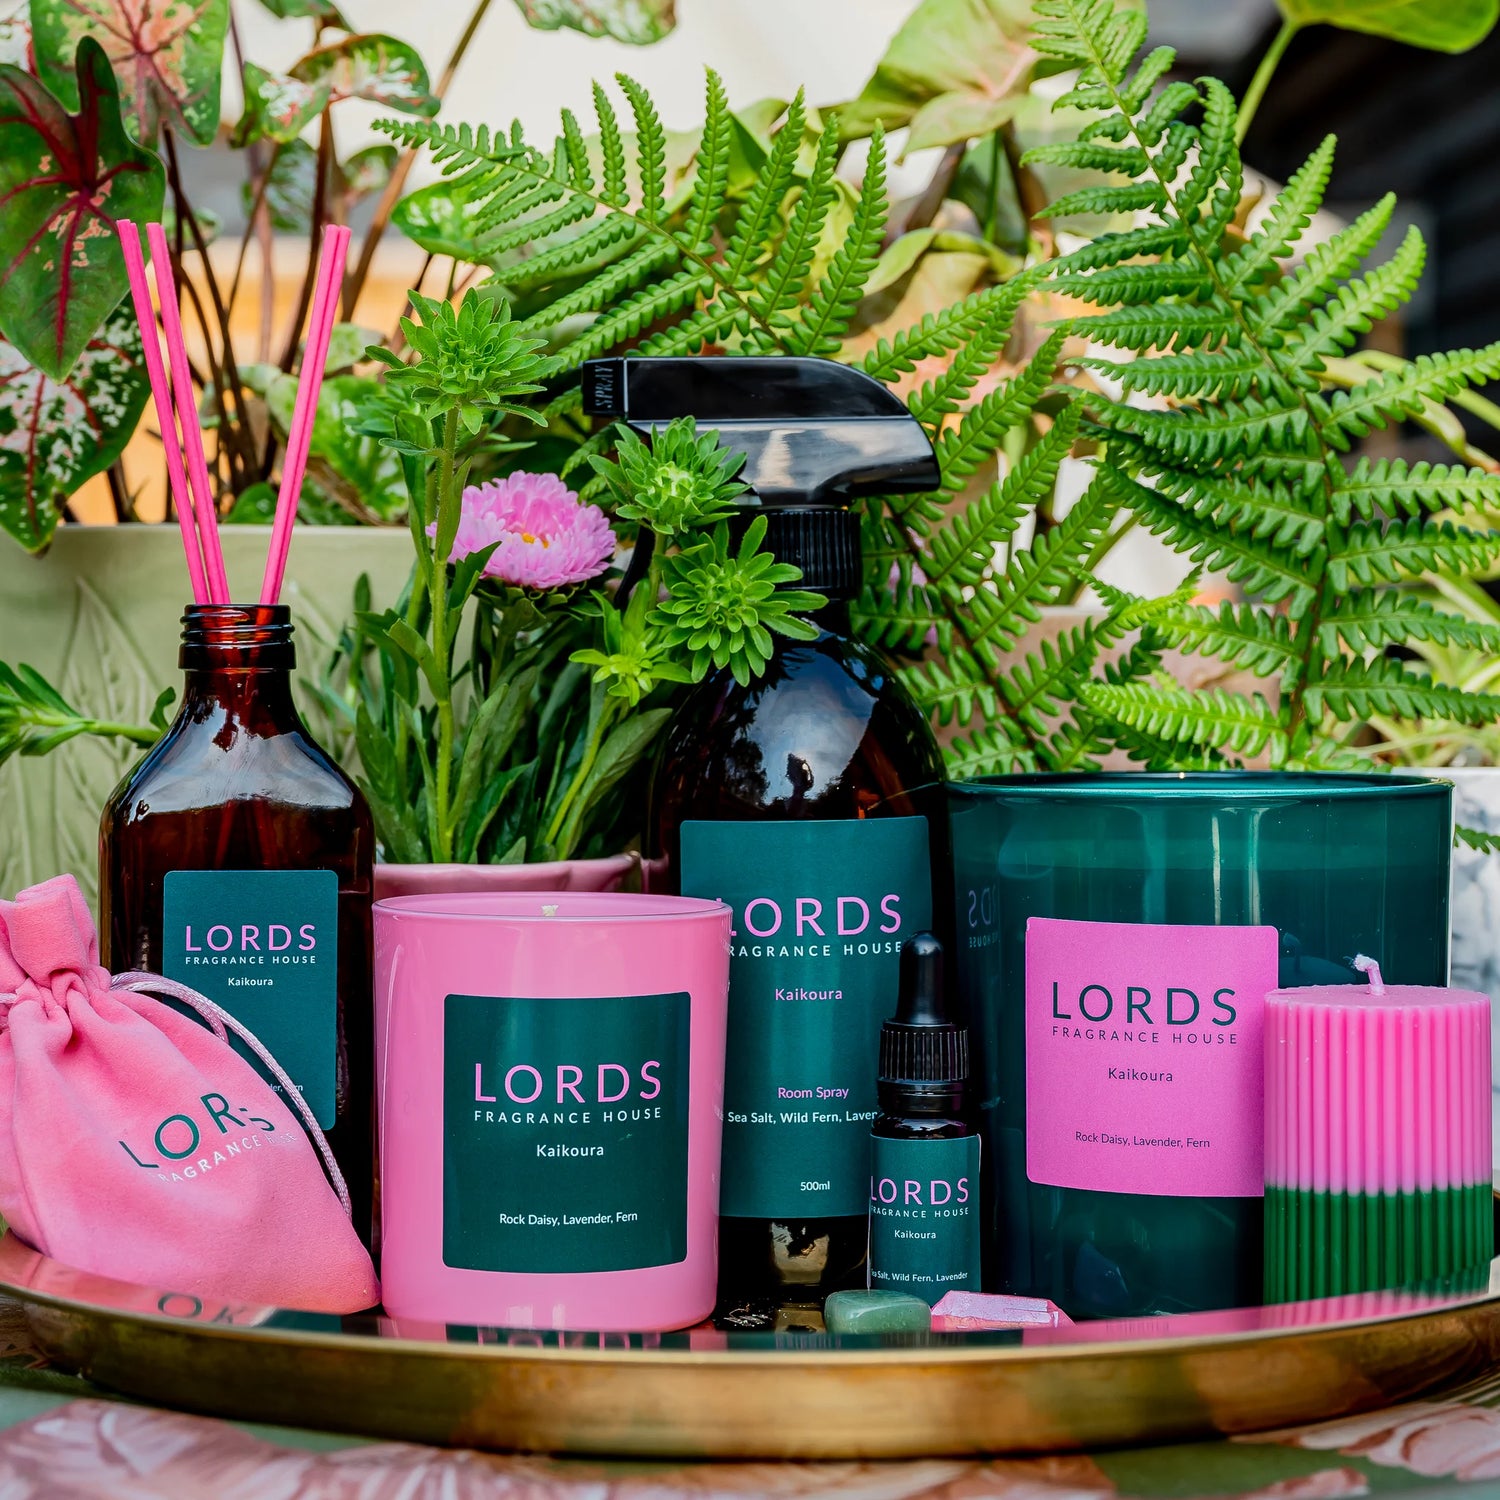 Range of home fragrances from Lords Fragrance House